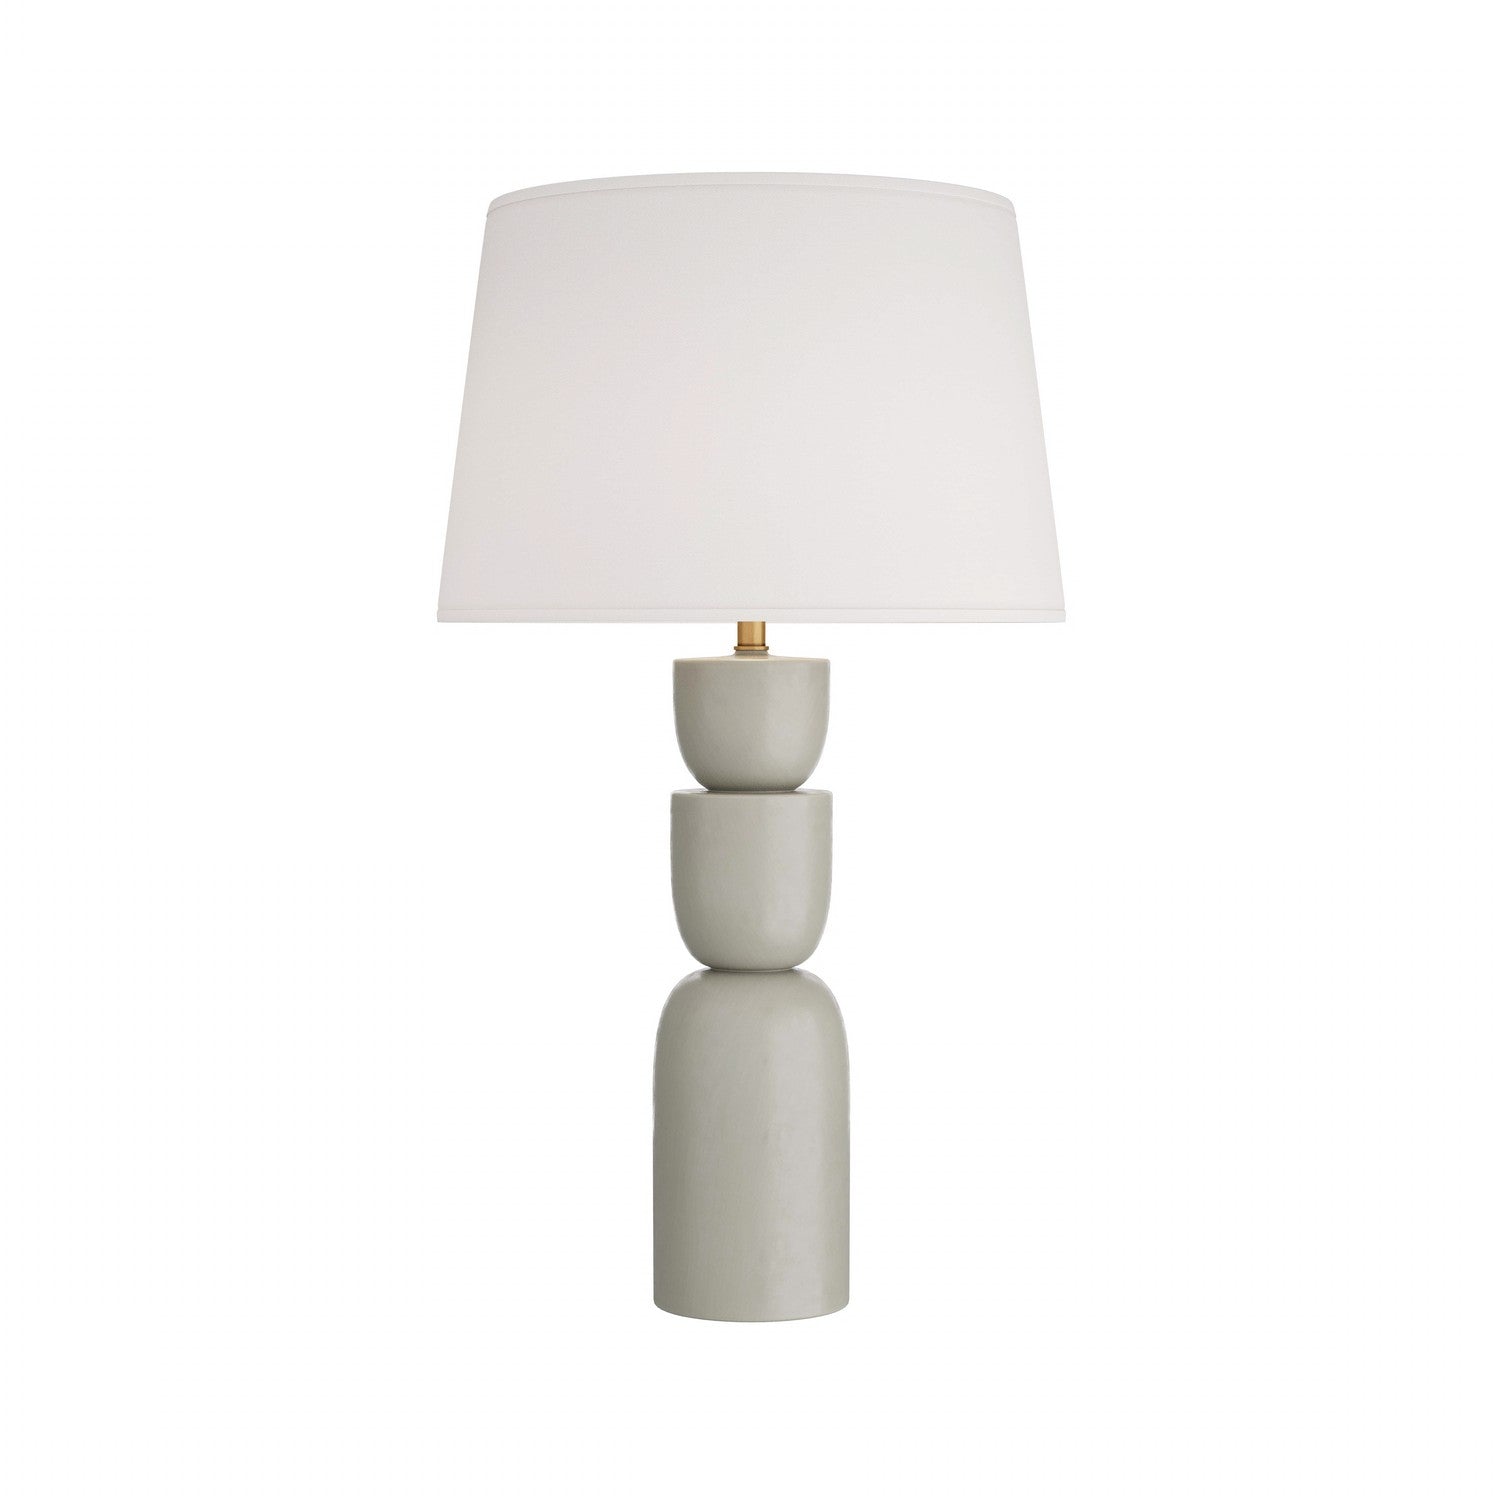 One Light Table Lamp from the Tasha collection in Trout finish